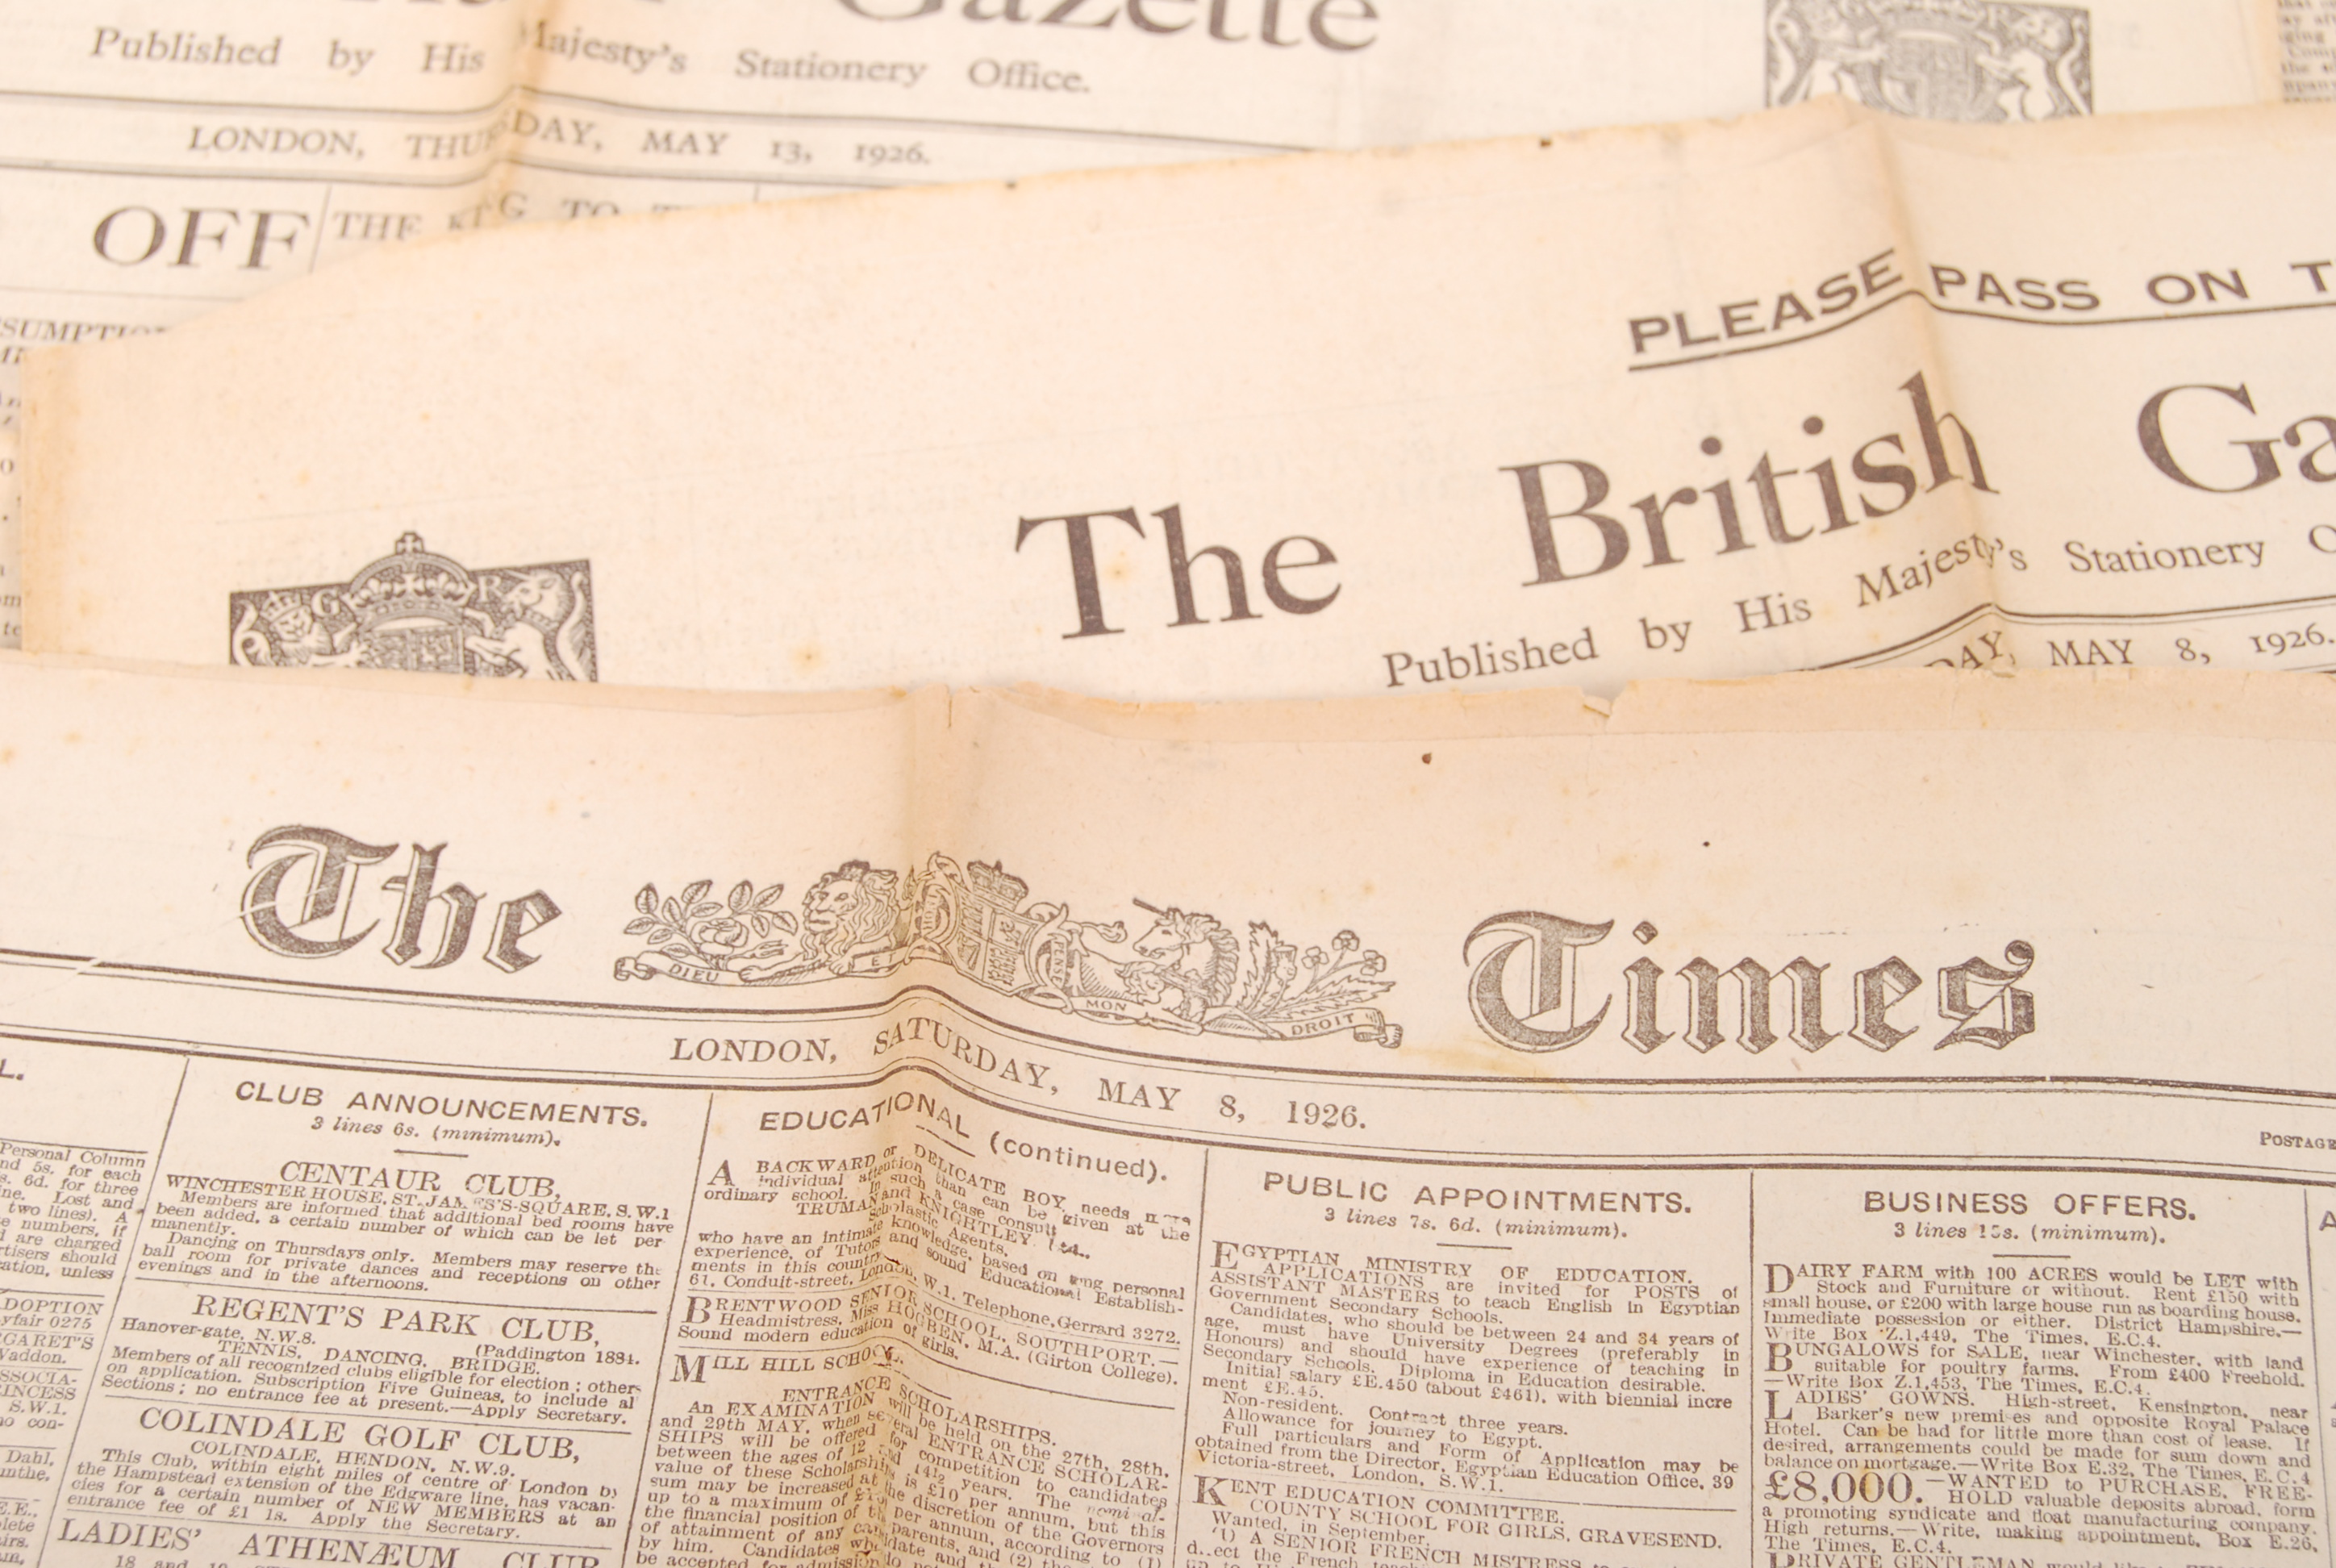 ANTIQUE NEWSPAPERS RELATING TO THE BRITISH GENERAL STRIKE 1926 - Image 4 of 4